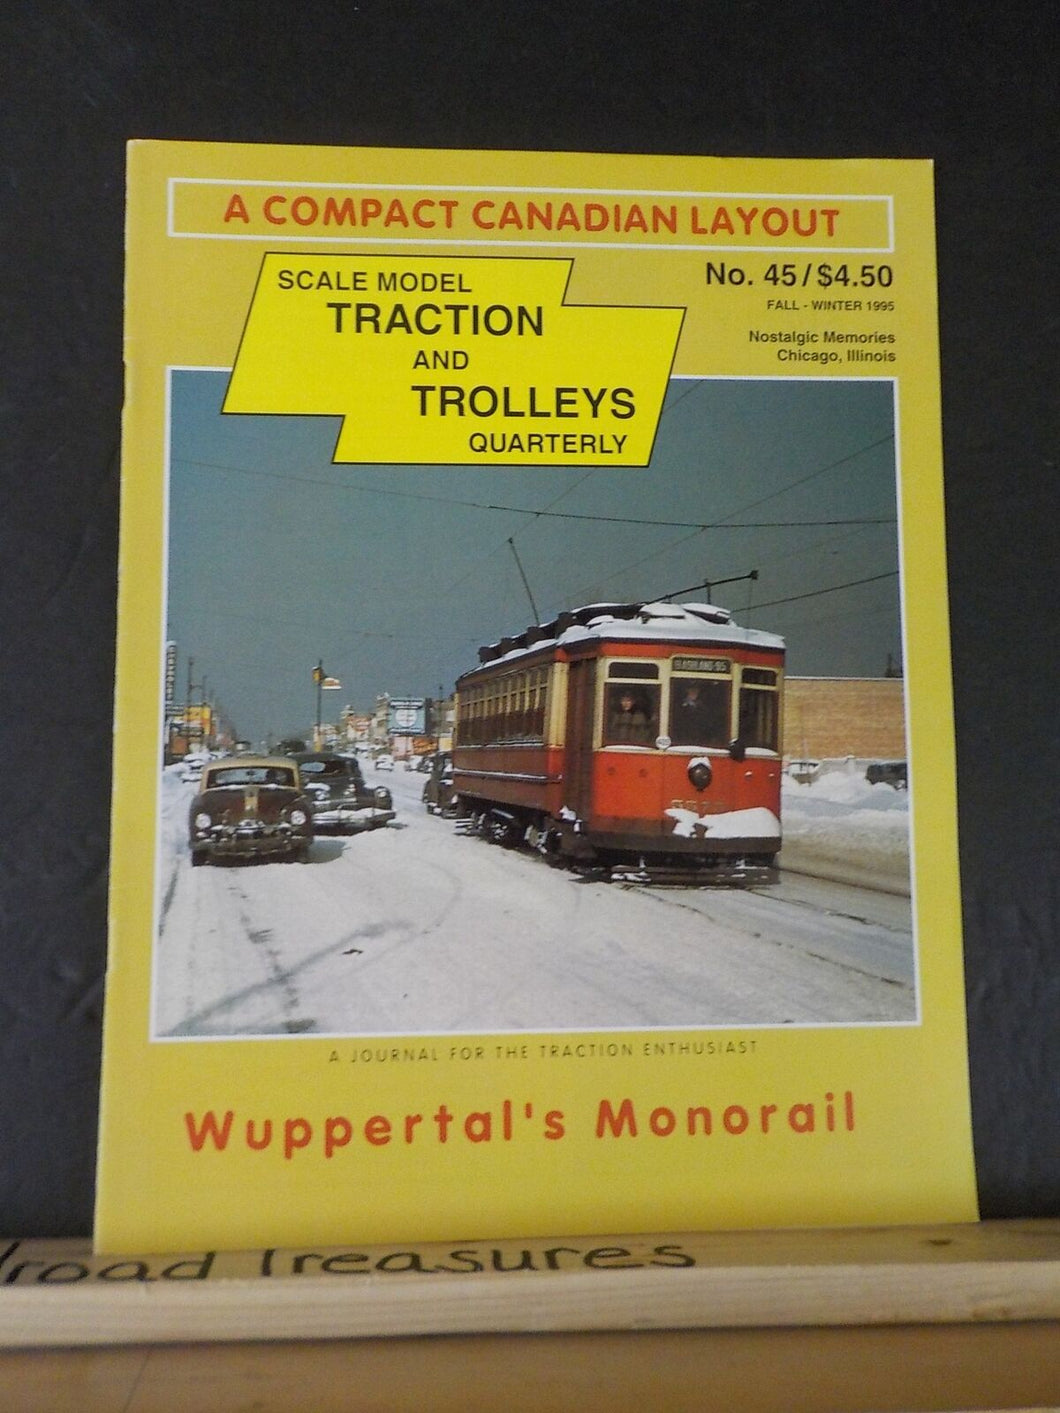 Scale Model Traction and Trolleys Quarterly #45 Fall Winter 1995